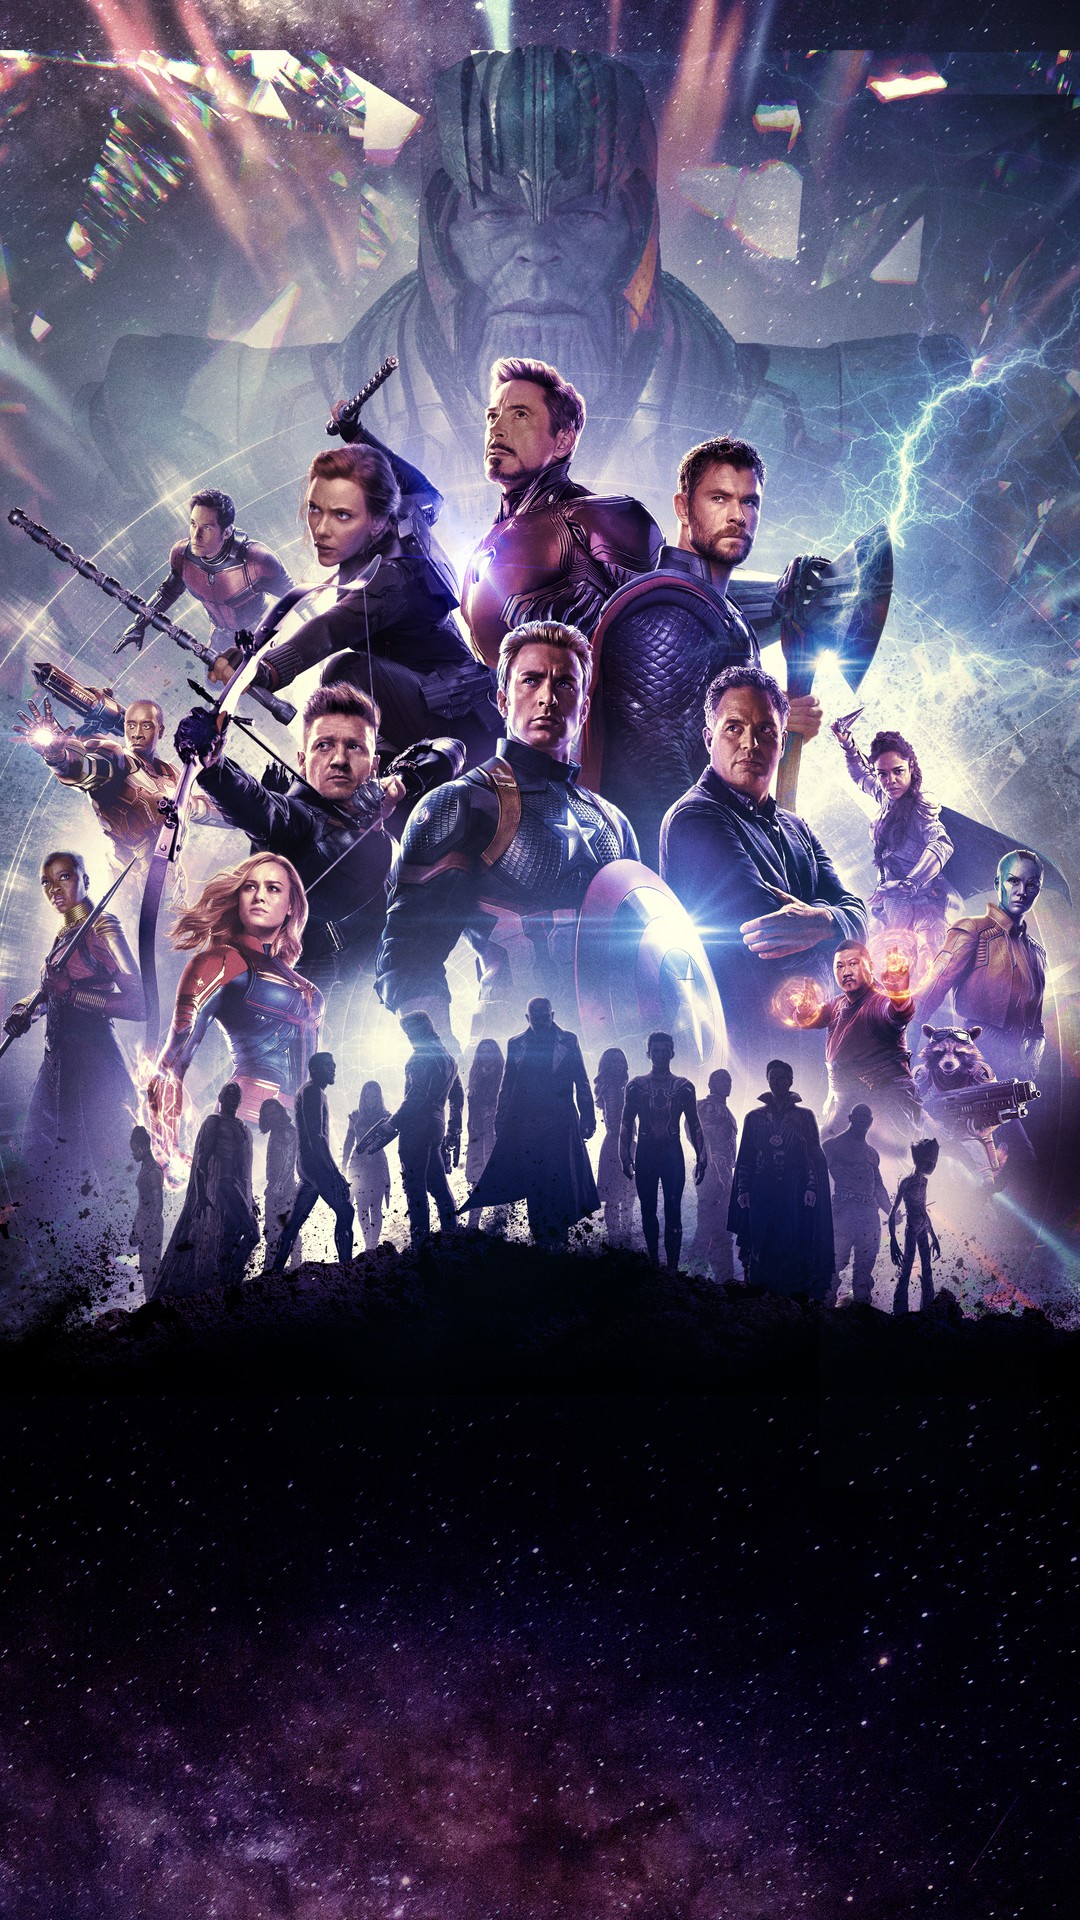 Avengers Endgame 2019 Android Wallpaper With High-resolution - Avengers  Endgame Wallpaper Android - 1080x1920 Wallpaper 